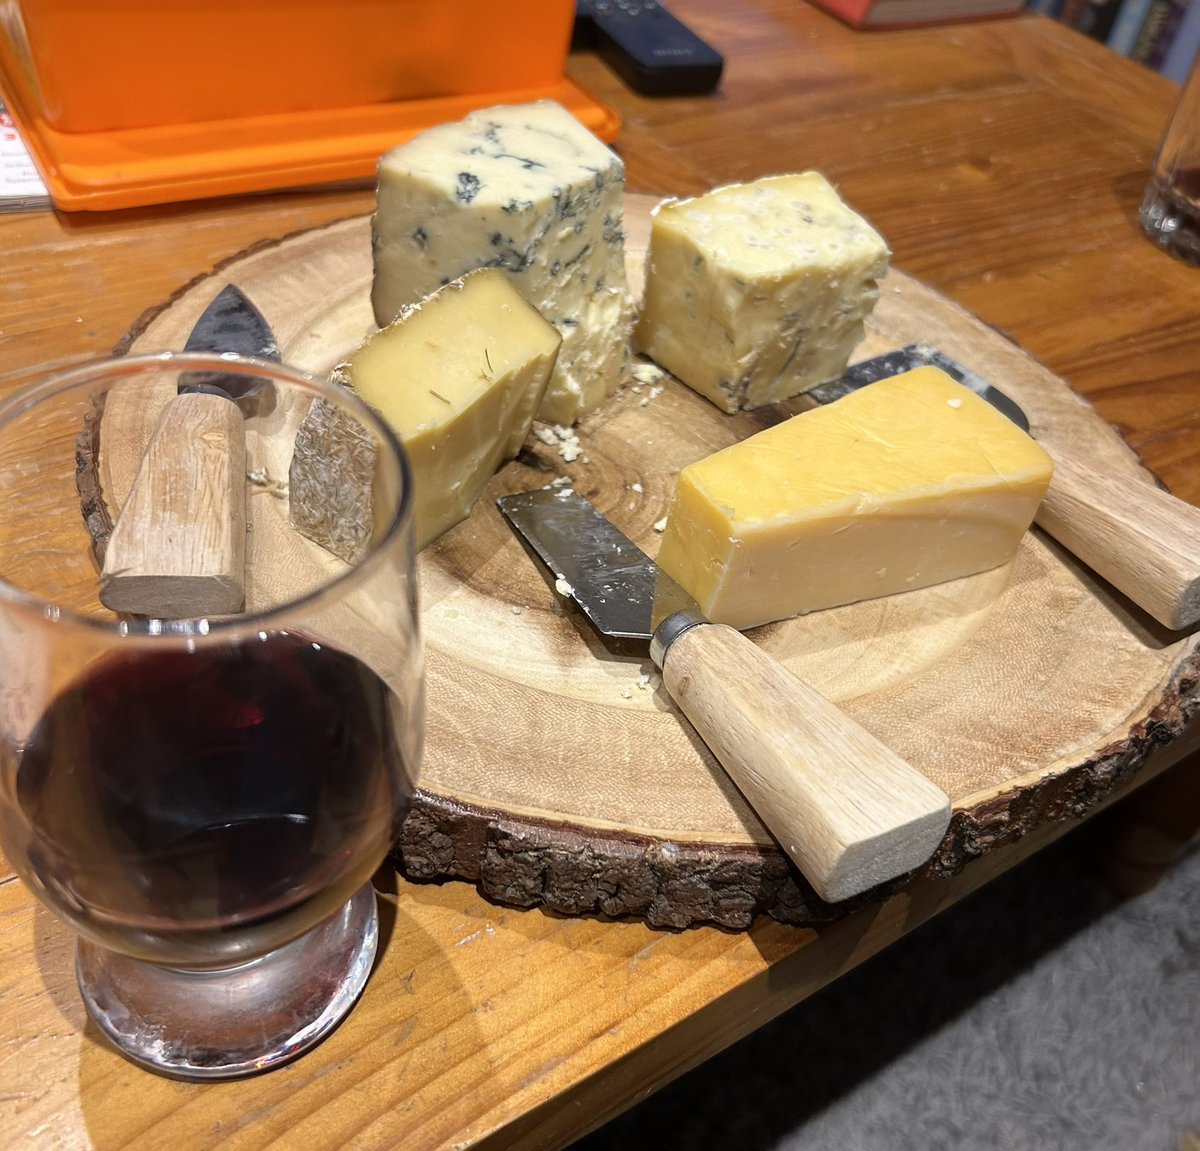 Back on the cheese tonight lads, and yes that is Tuesday night Port.